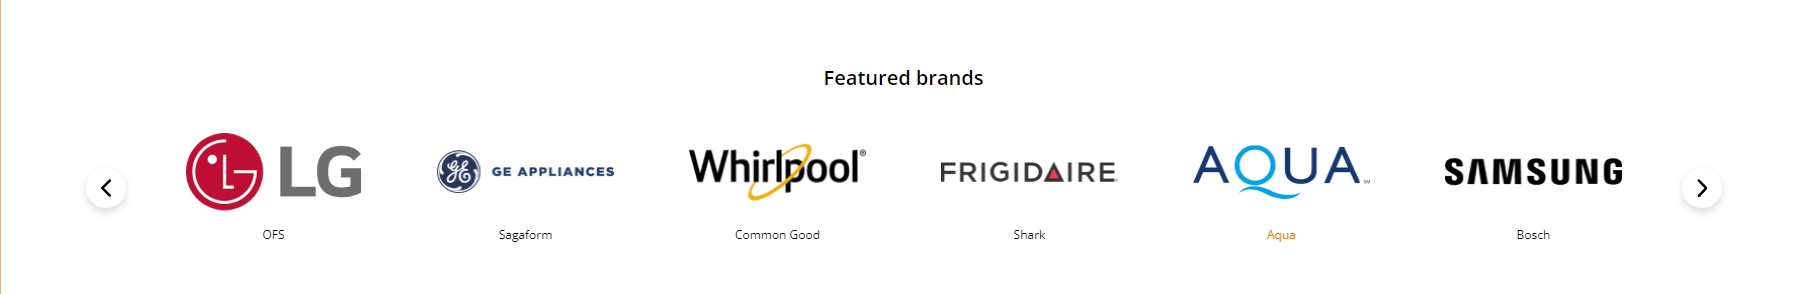 Featured-brand